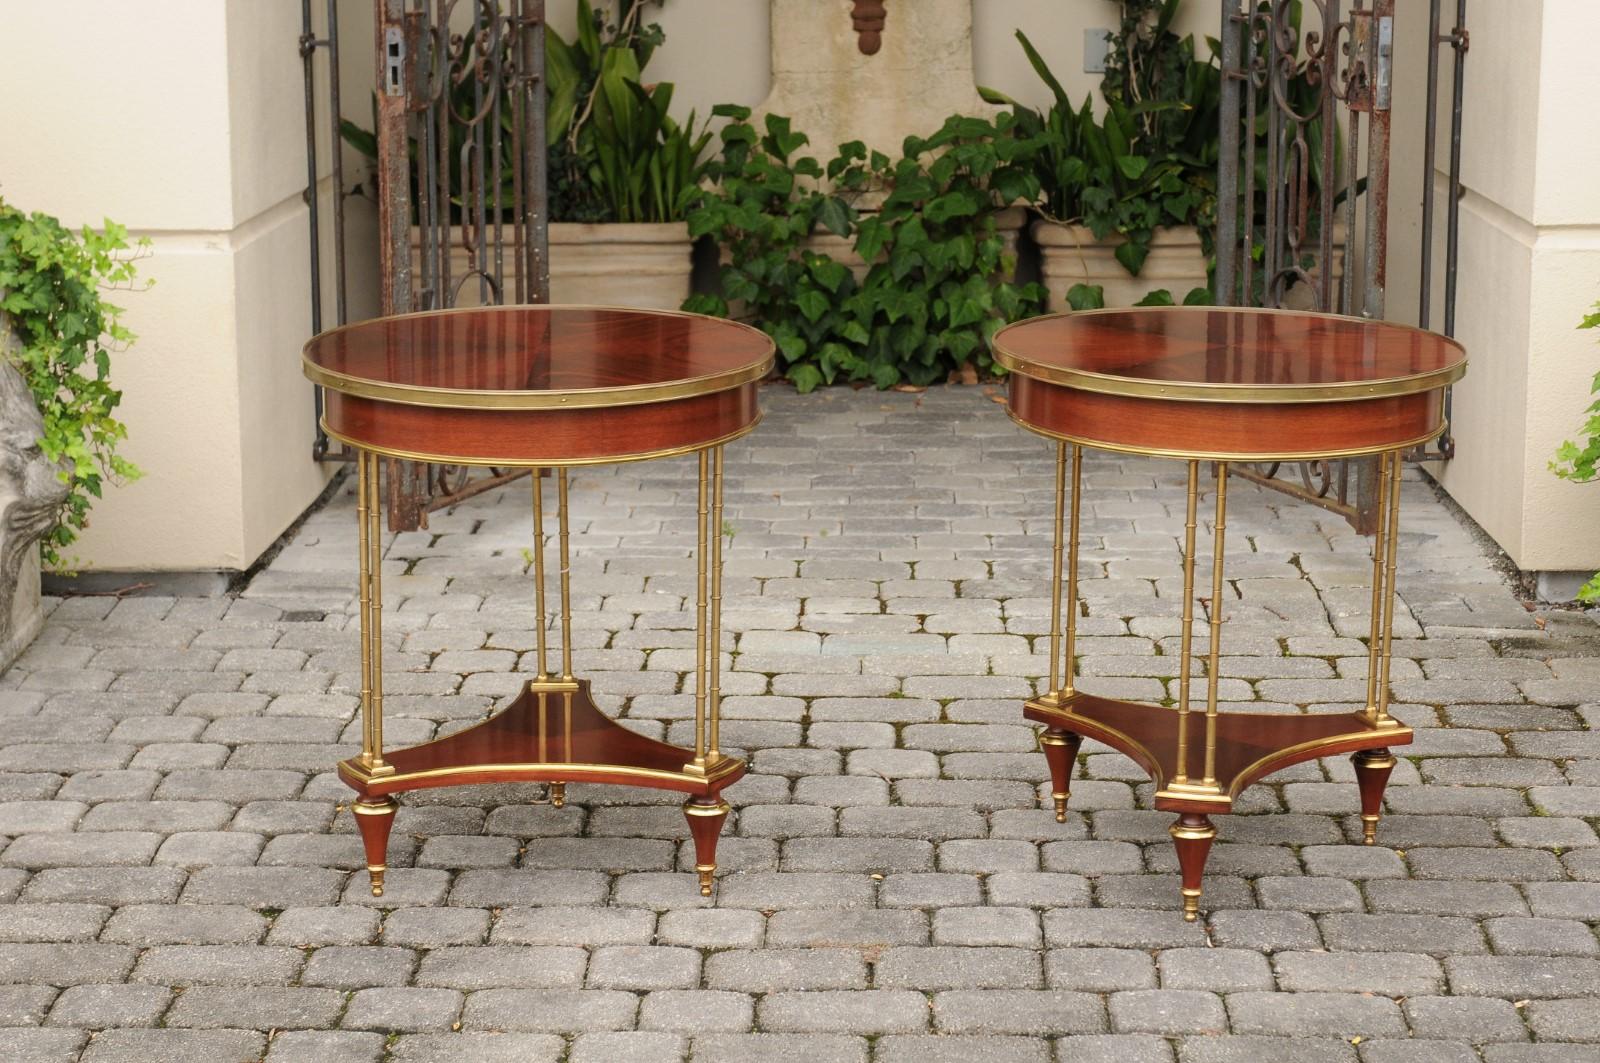 A pair of French mahogany and brass circular tables from the mid-20th century, with faux bamboo supports, tripartite shelves and toupie feet. Born in France during the mid-century period, each of these two exquisite tables features a circular